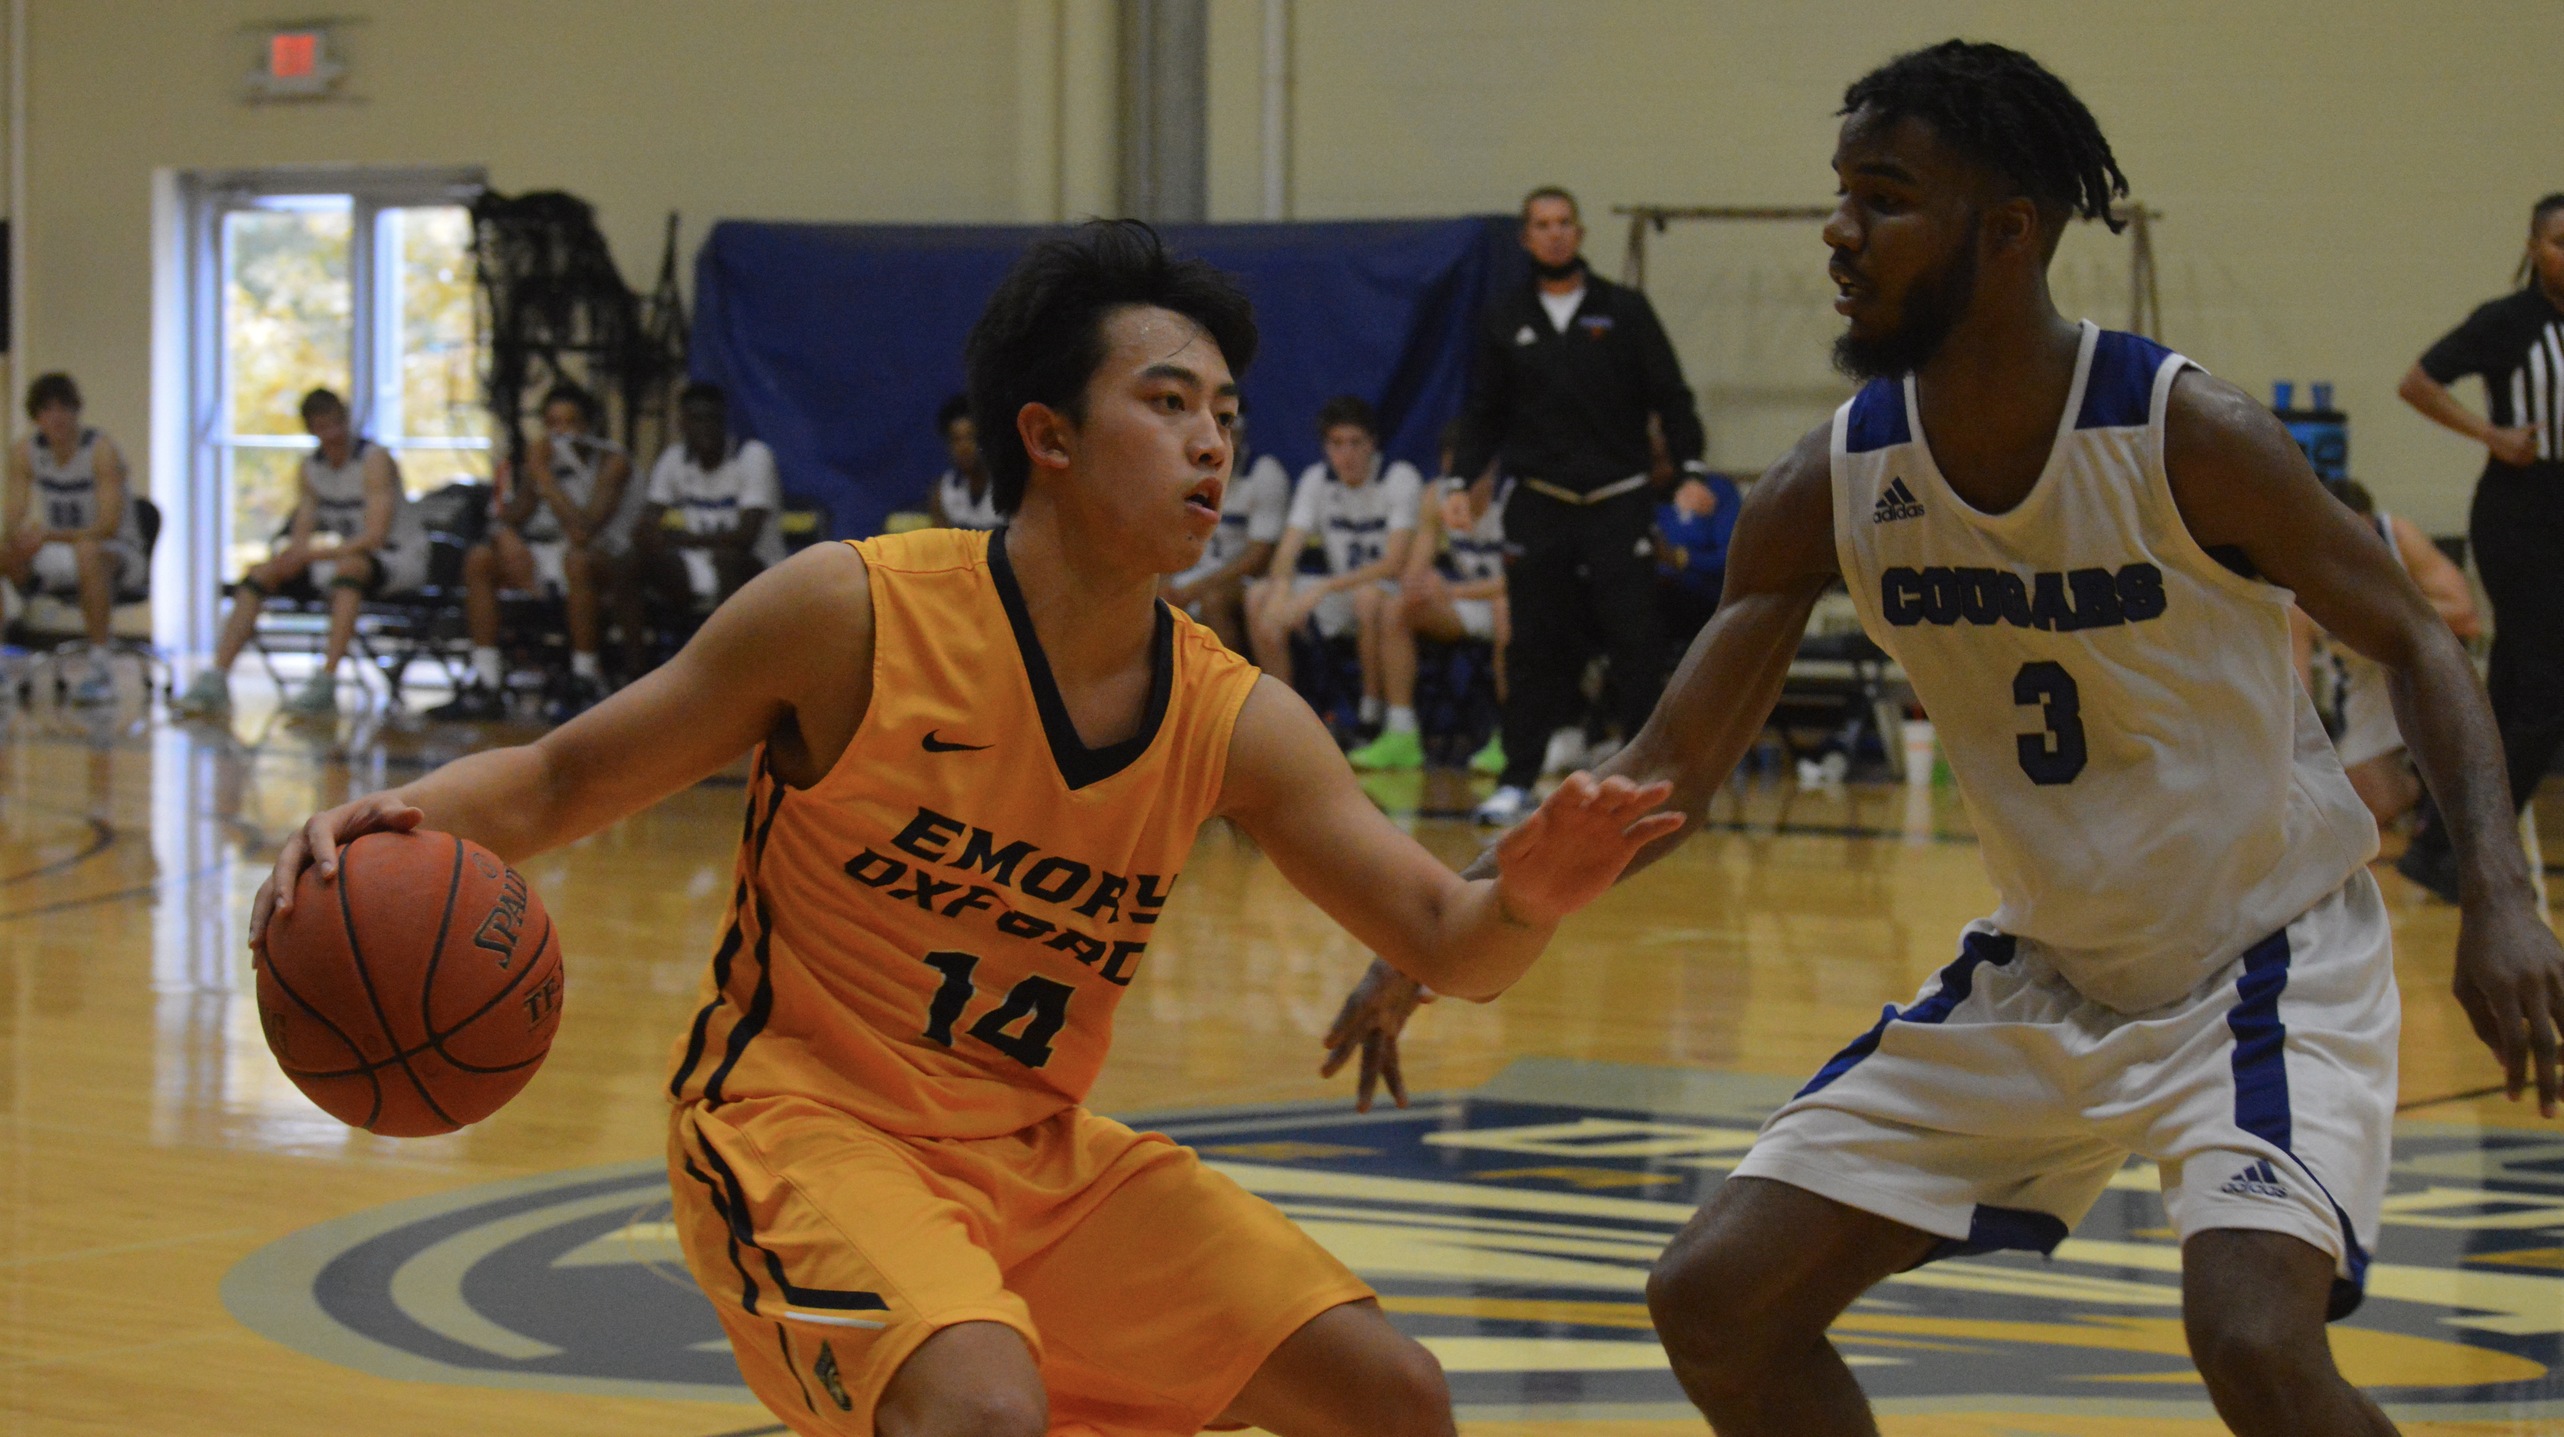 Emory Oxford Falls in Back-To-Back Games Against Cougars